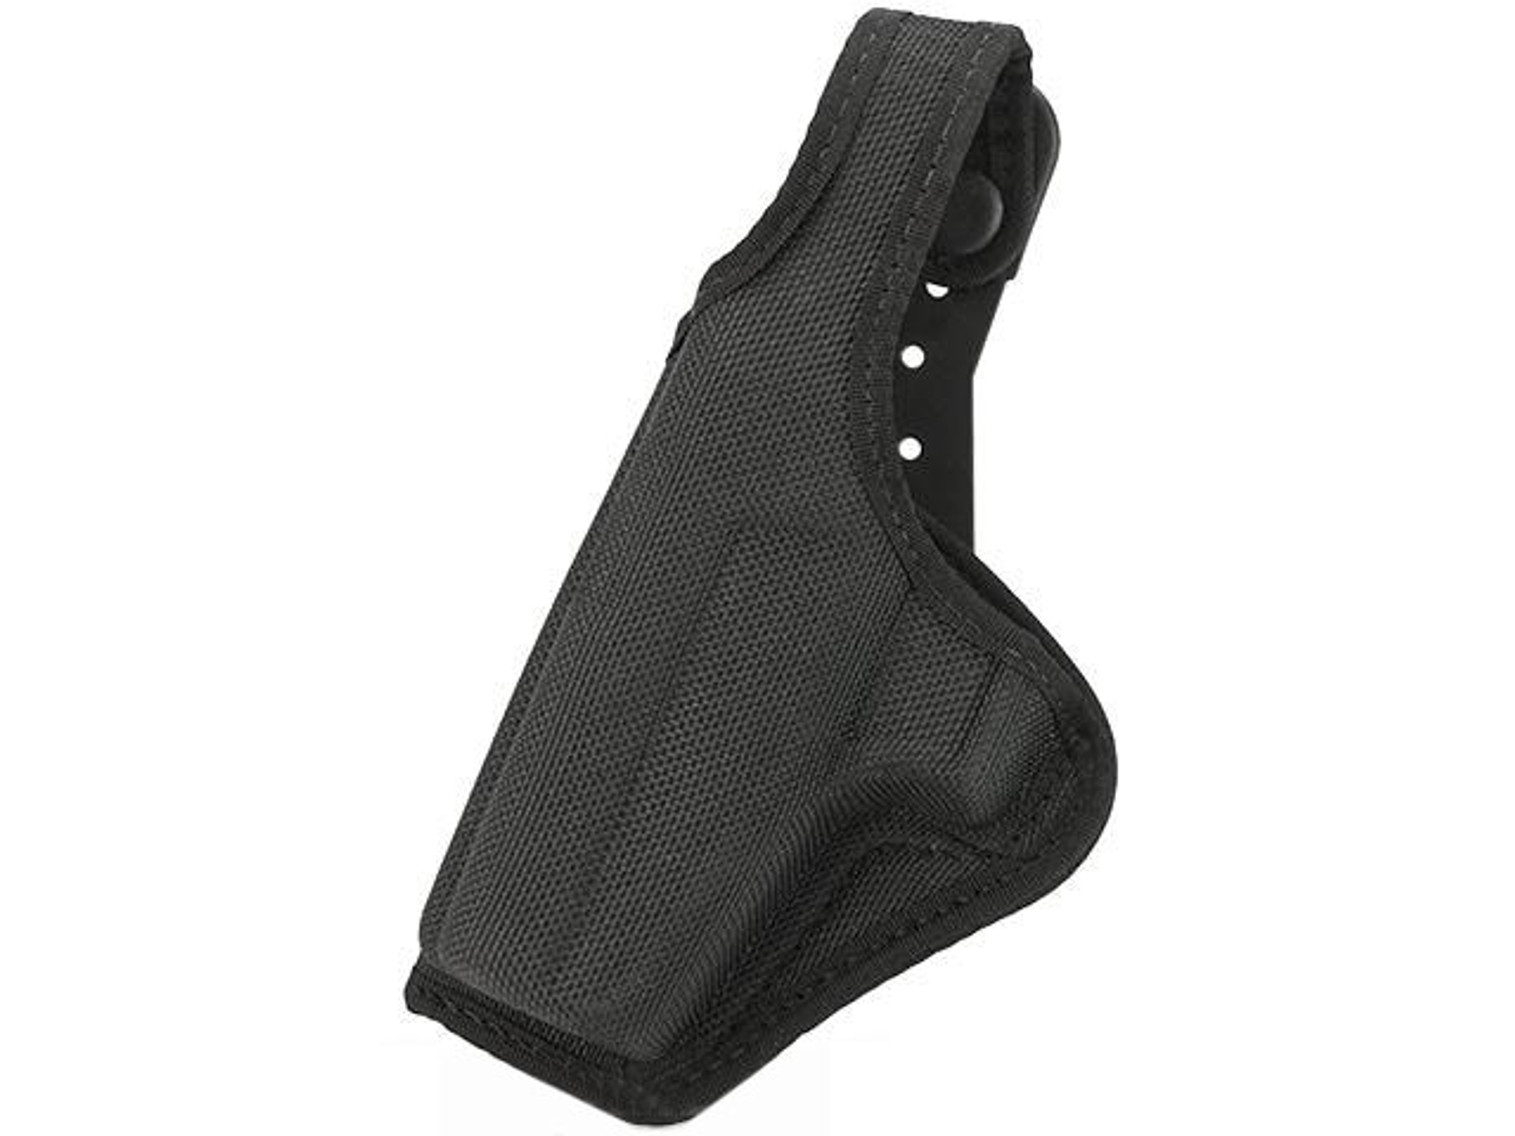 SAFARILAND / BIANCHI AccuMold Belt Clip Holster with Thumbsnap - SW99 / Walther 99 (Left)